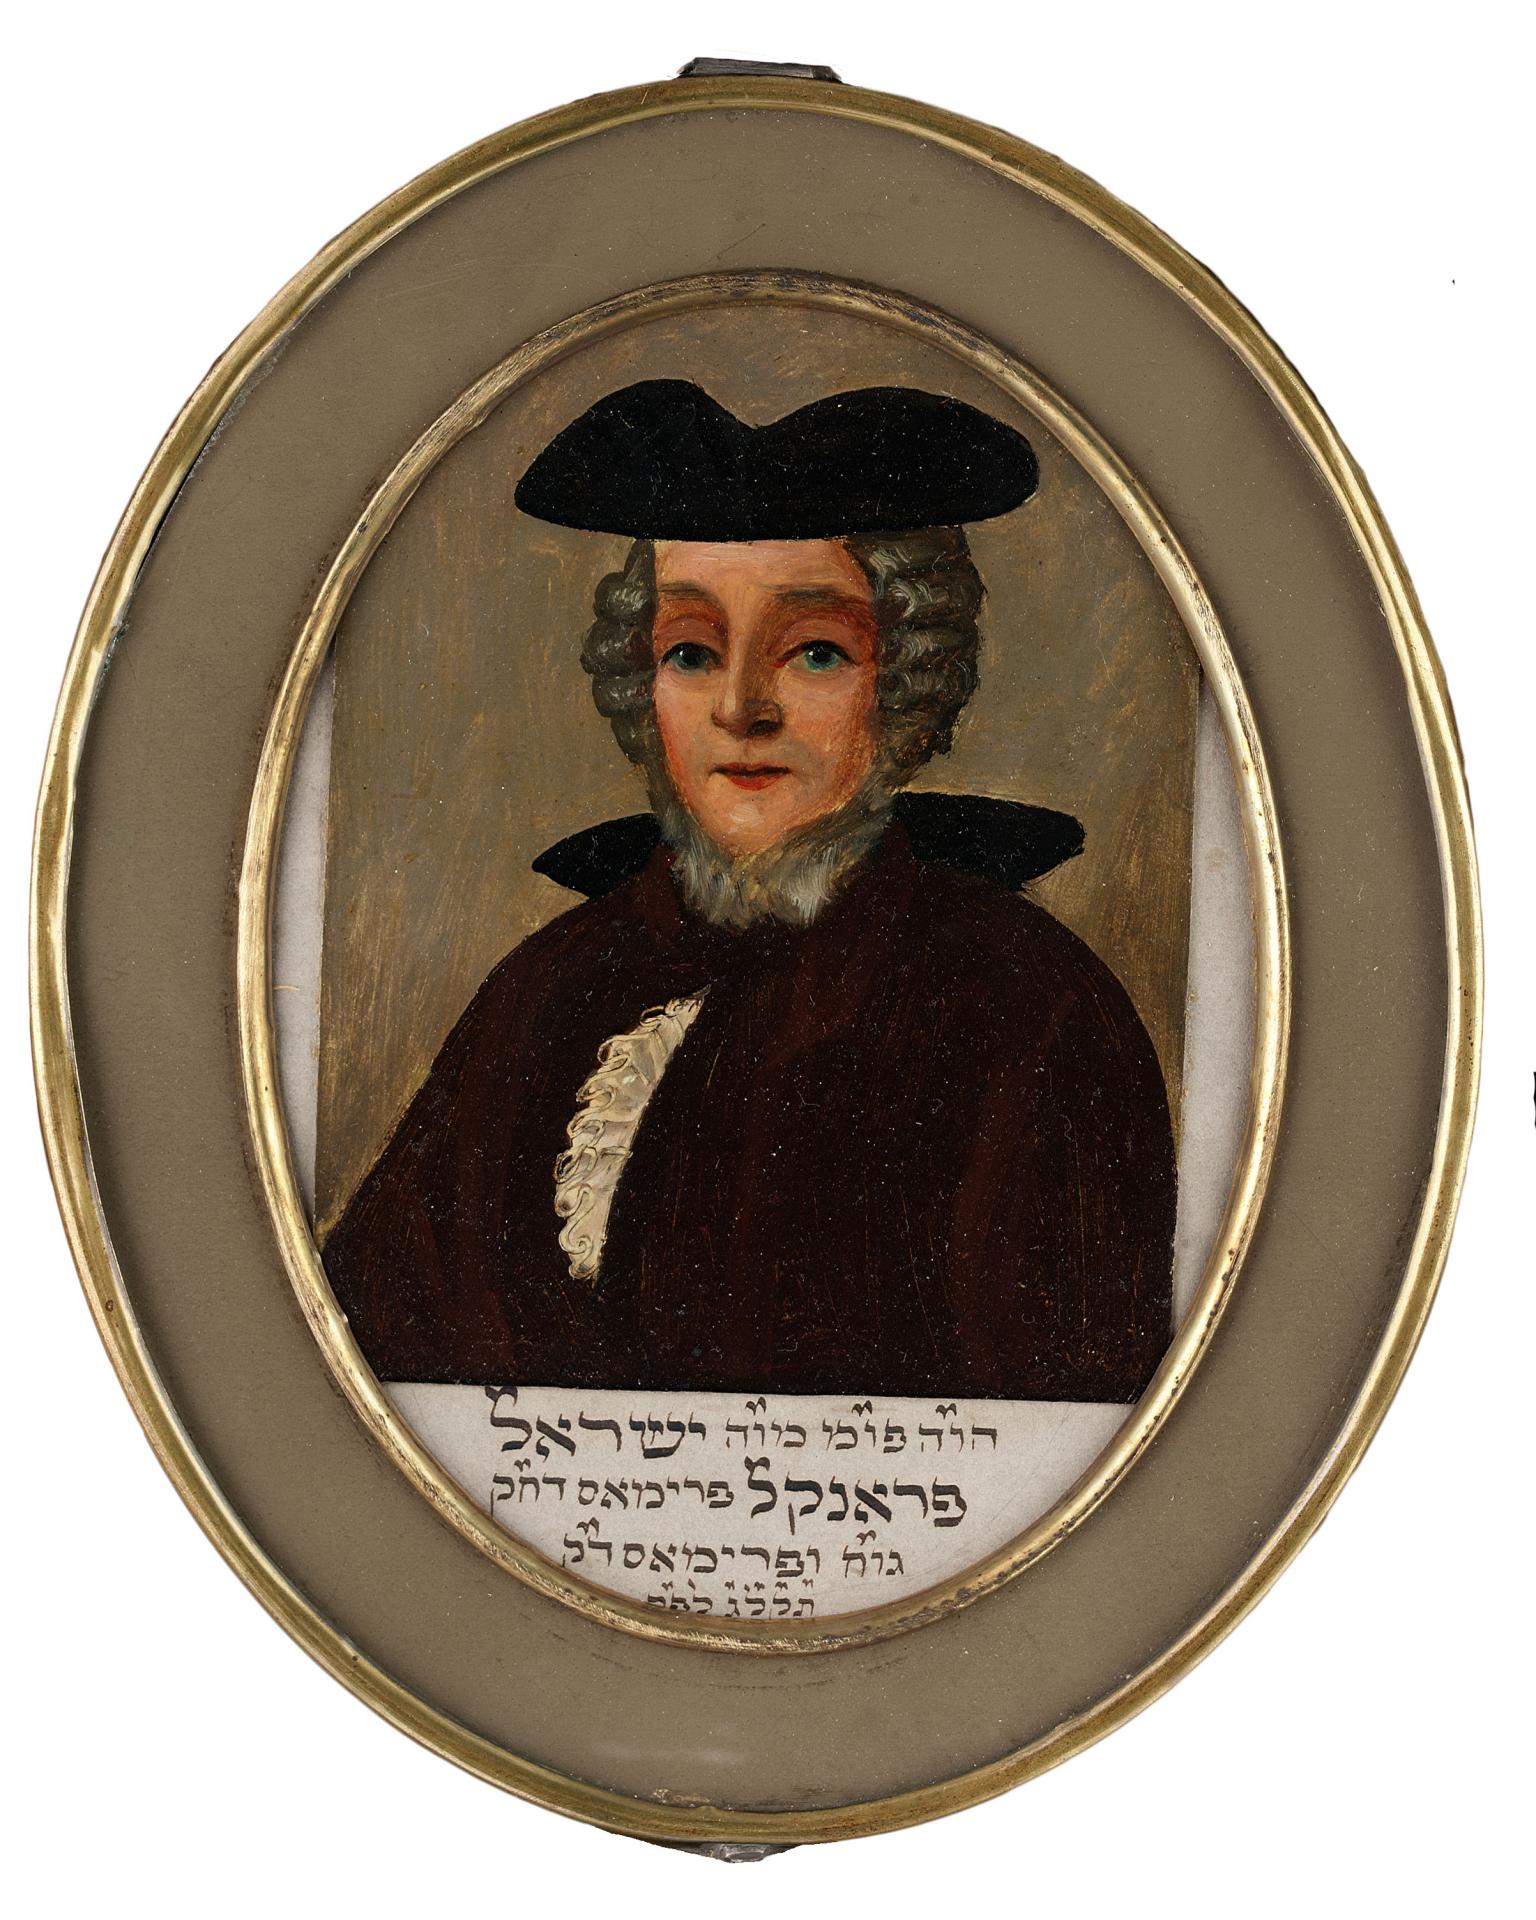 Portrait painting of man in circular frame and Hebrew text underneath.